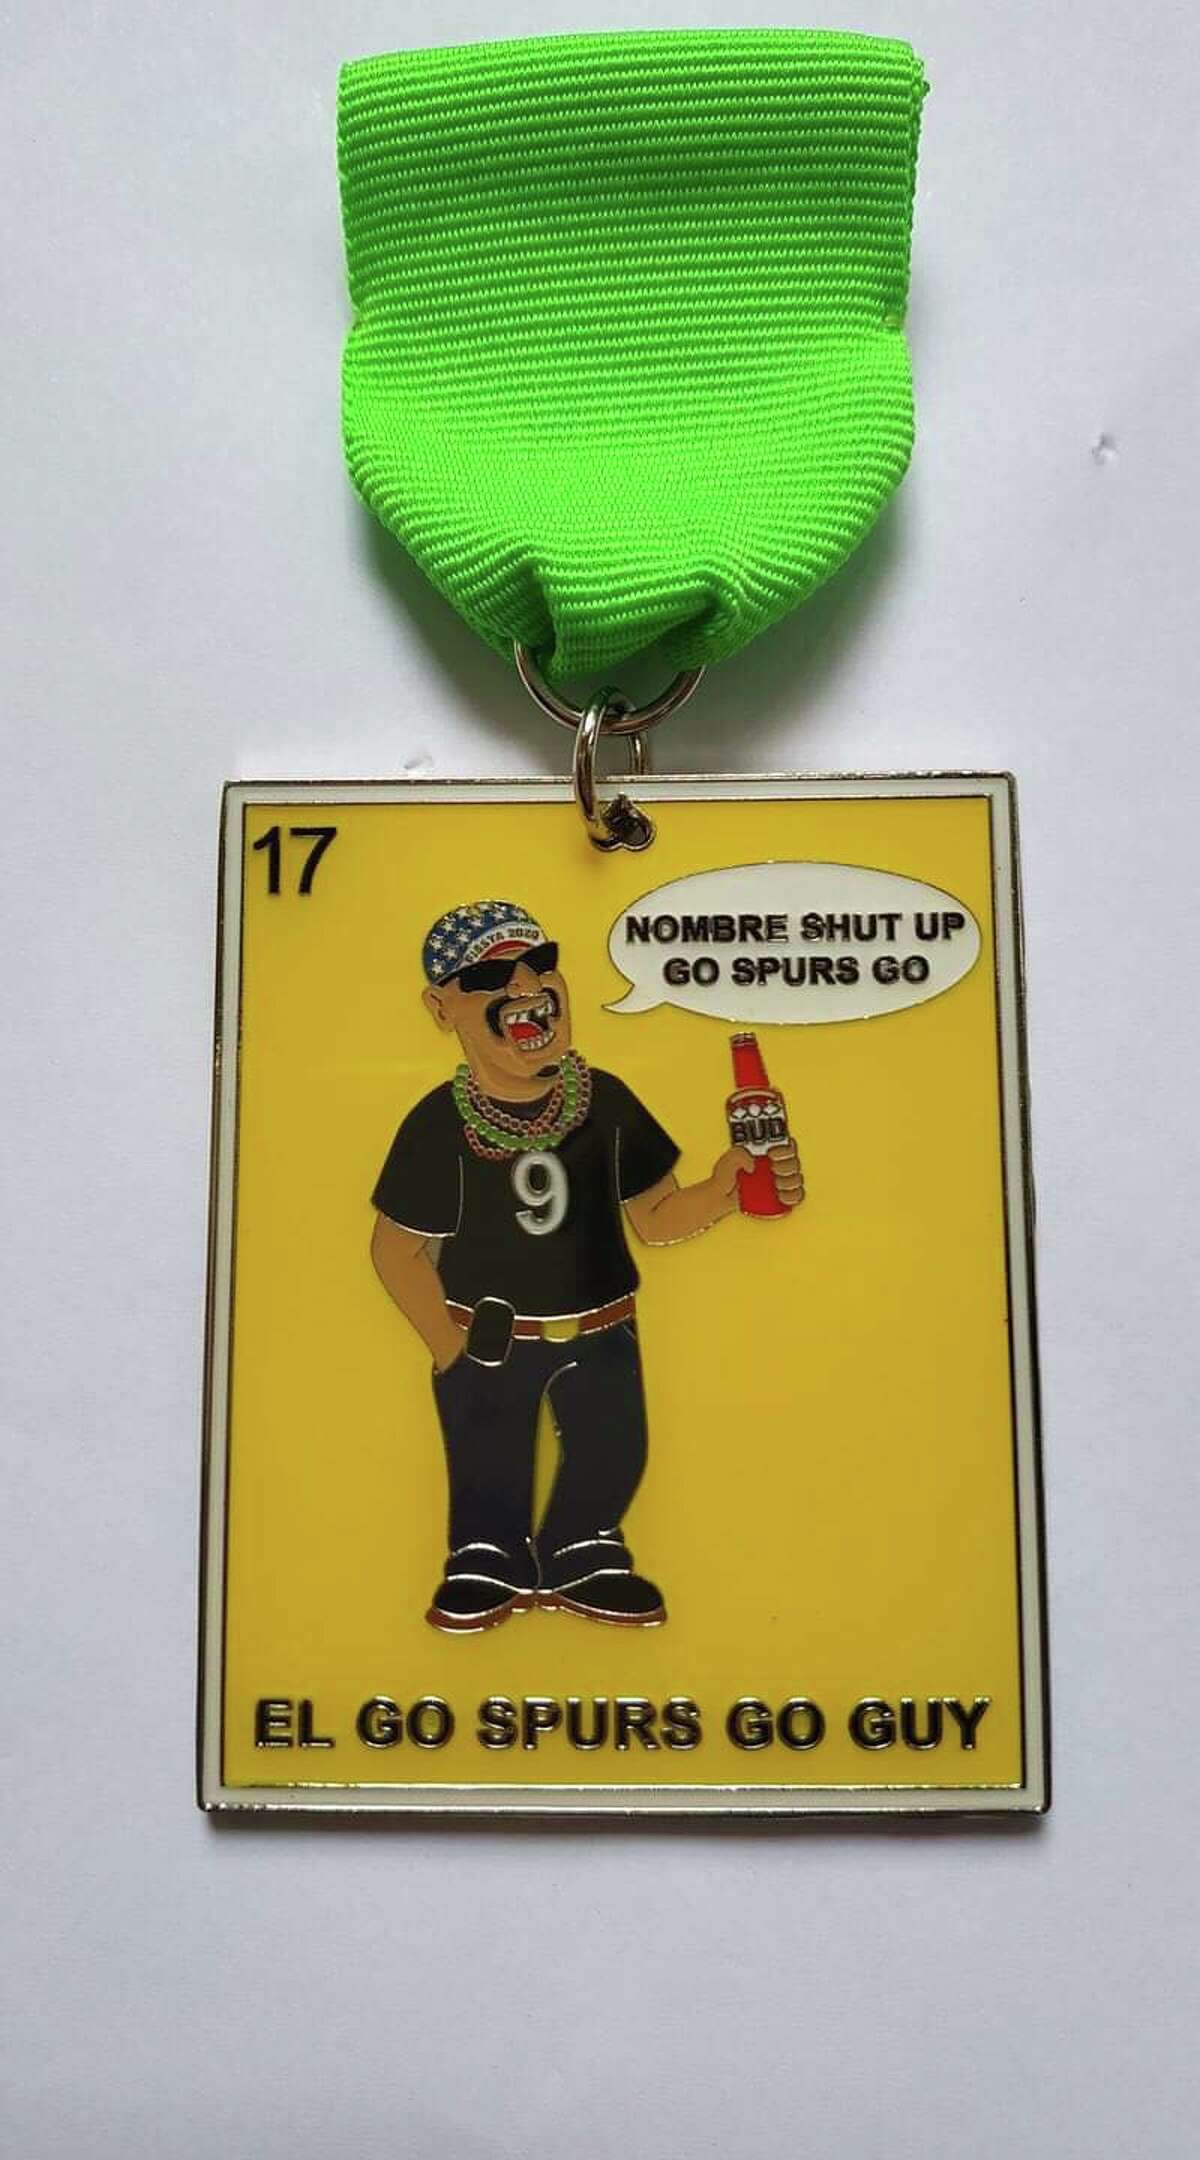 A front runner in the 2020 collectibles is the resurgence of the 2017 Market Square star, Felipe Aldape, better known as the "Nombre Shut Up, Go Spurs Go" guy. His caricature is on a lotería-style medal called "El Go Spurs Go Guy" designed by Diana Gonzalez, owner of Diana's Medals.